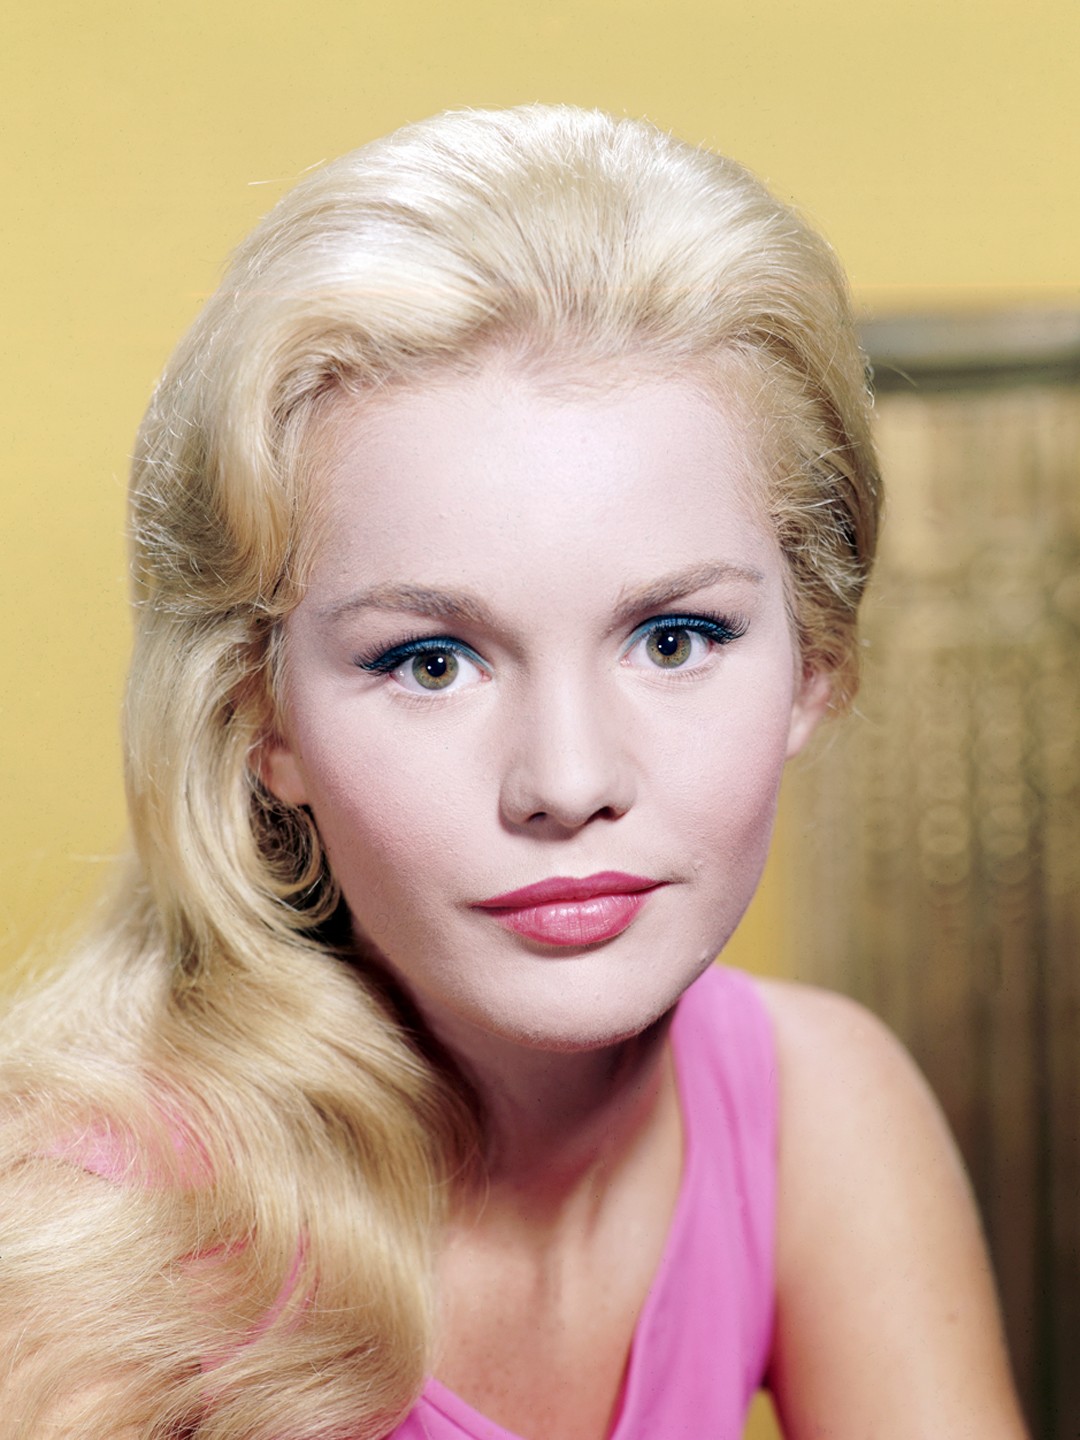 Tuesday Weld - Rotten Tomatoes, tuesday weld 